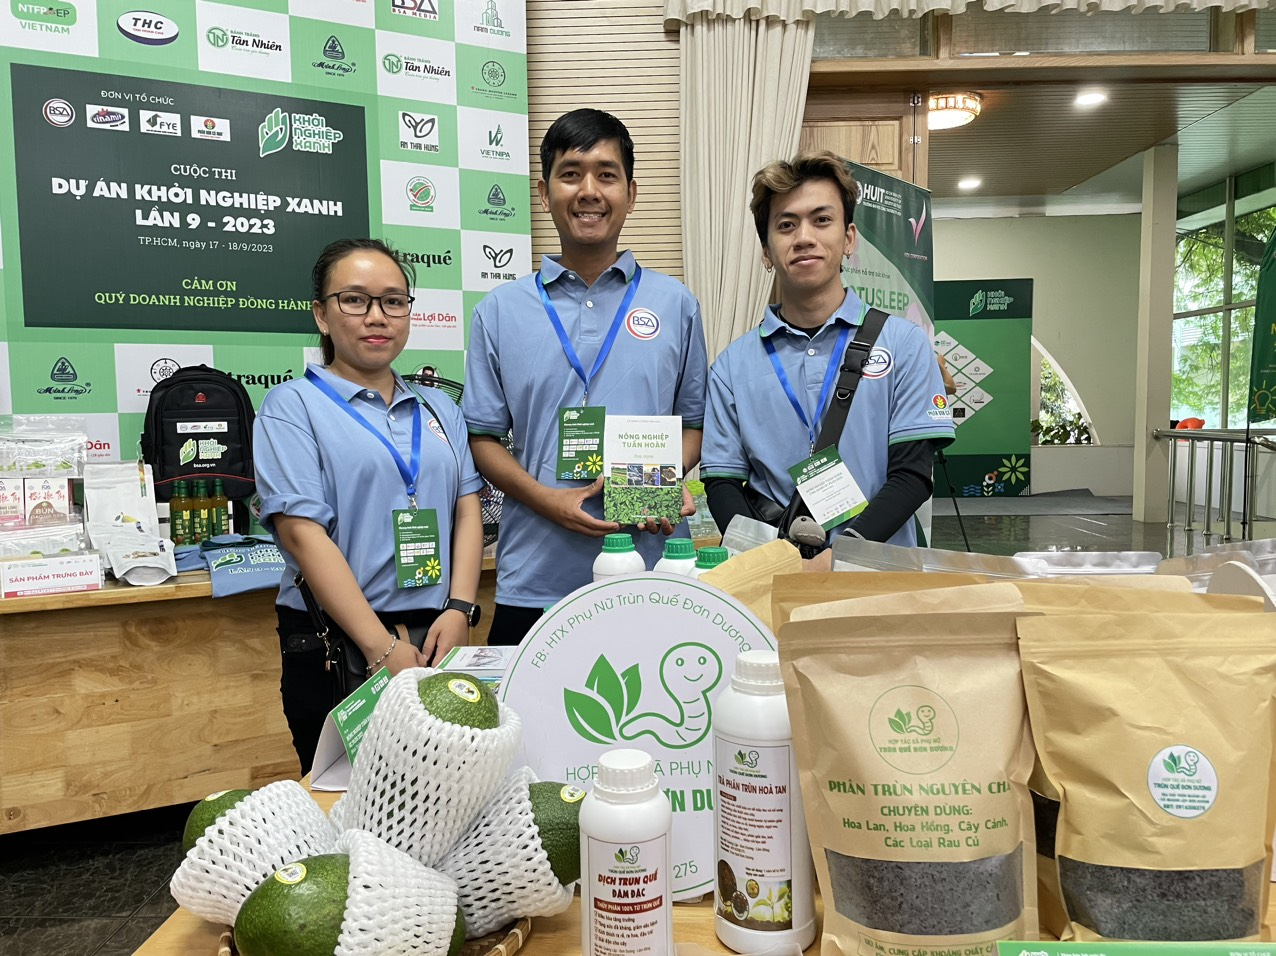 The GC PLUS circular agriculture project (Ninh Thuan) of the group Le Minh Vuong, Nguyen Thi Tuyet Van Linh, and Nguyen Cong Tien, continues to enter the final round. Photo: Tran Quynh.